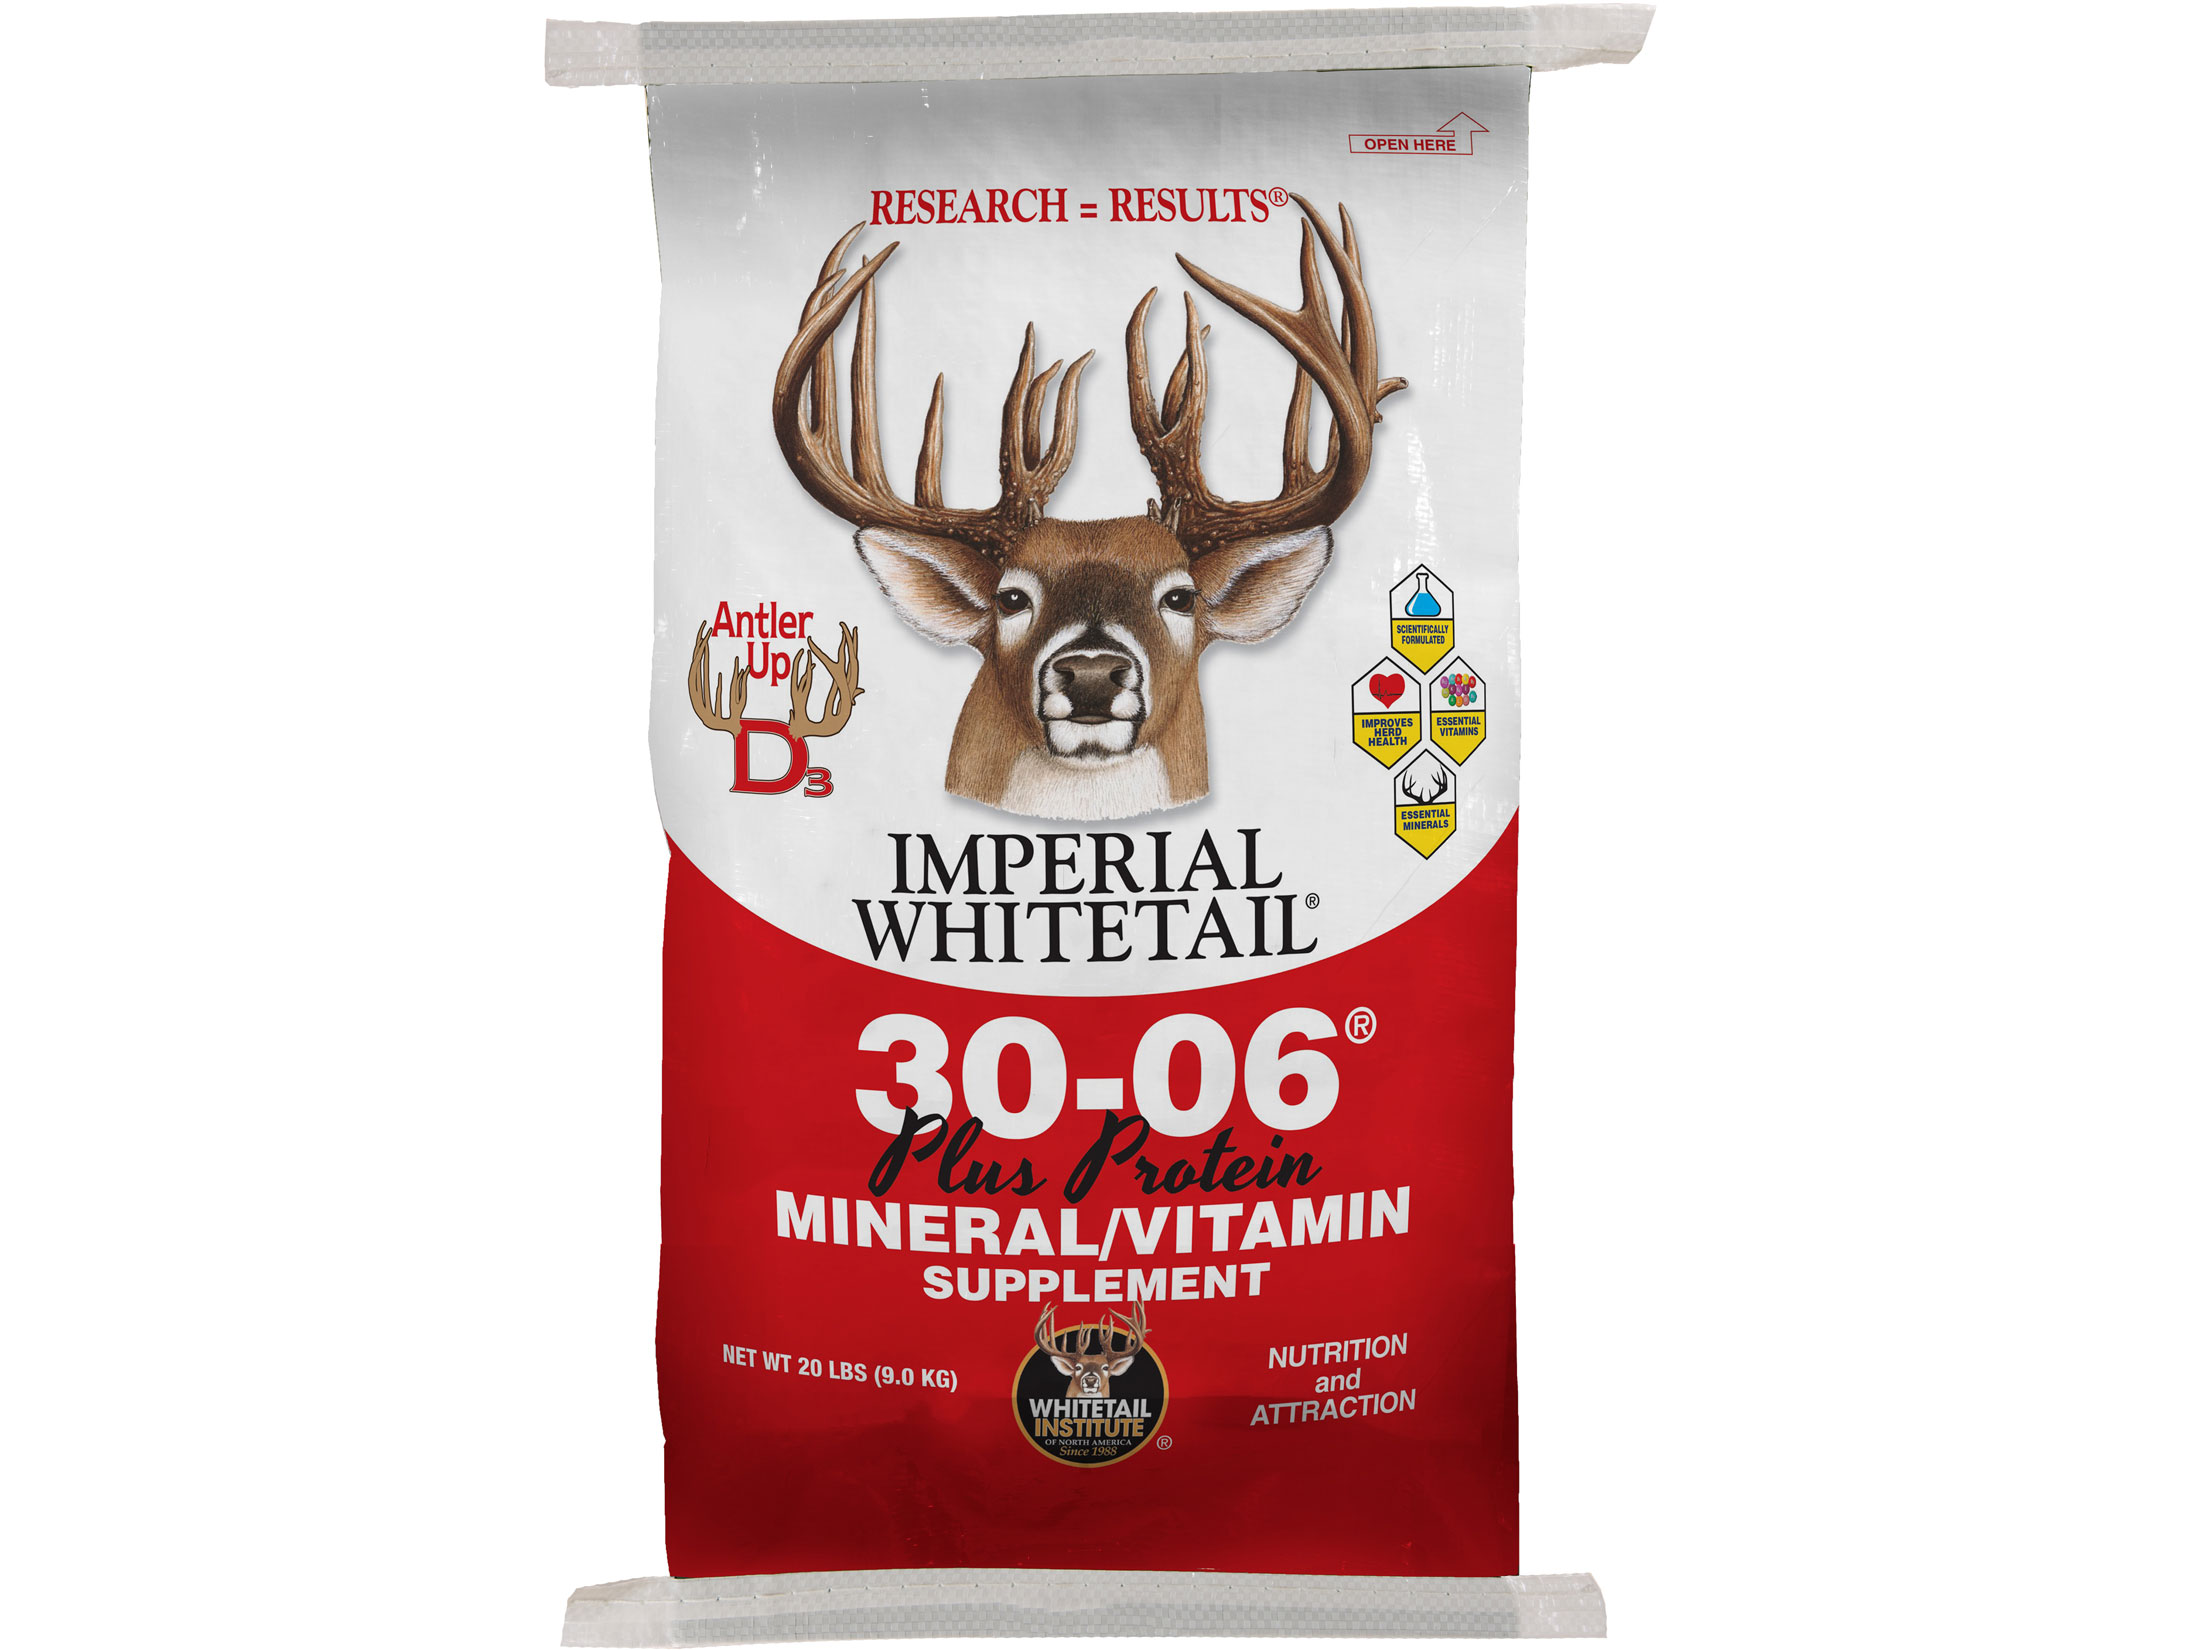 Imperial 30-06 Mineral/Vitamin Supplement 5 lbs. 